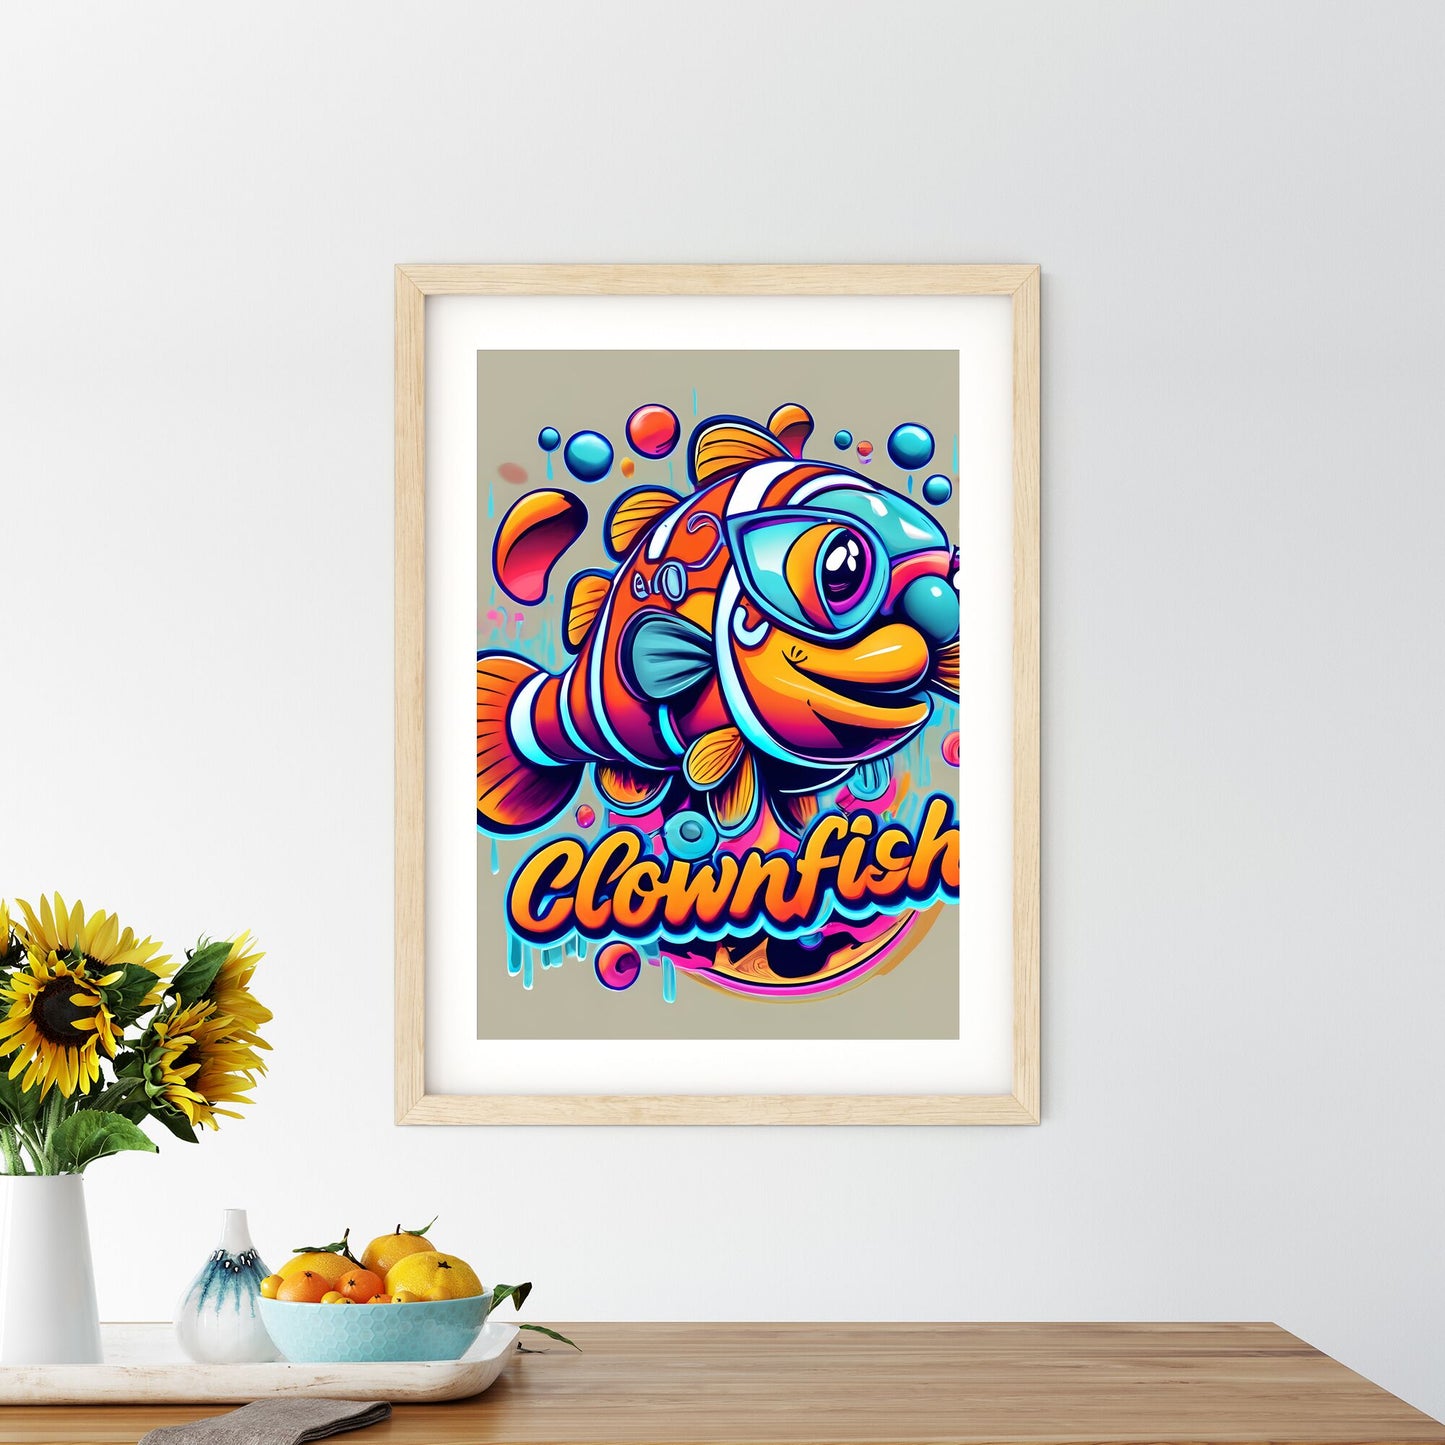 Clownfish - A Colorful Cartoon Fish With Goggles Art Print Default Title